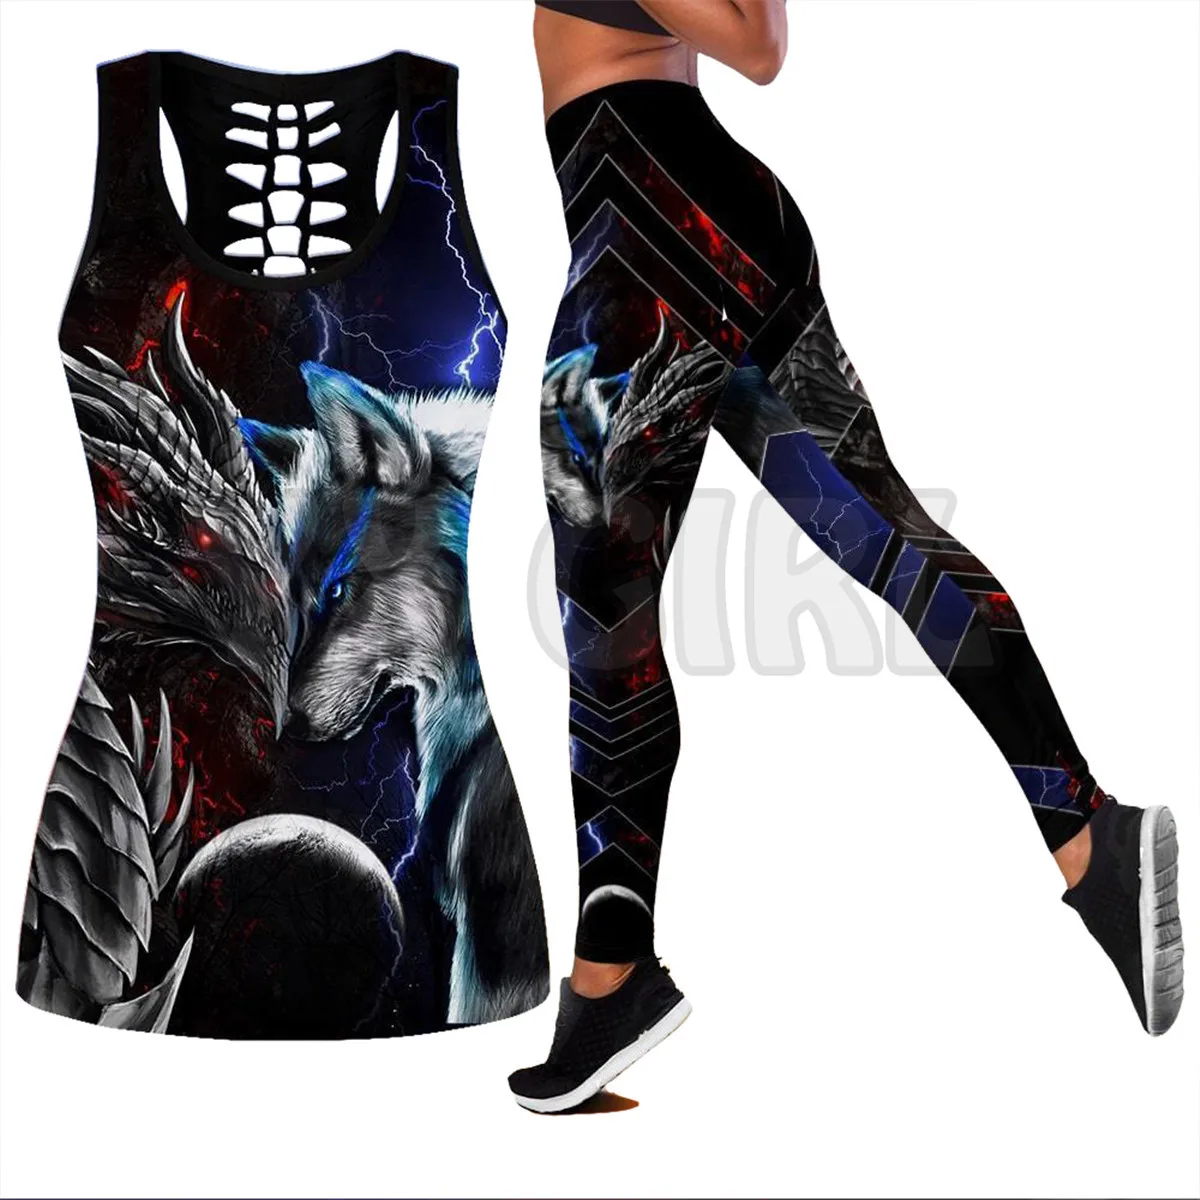 Dragon and wolf   3D Printed Tank Top+Legging Combo Outfit Yoga Fitness Legging Women